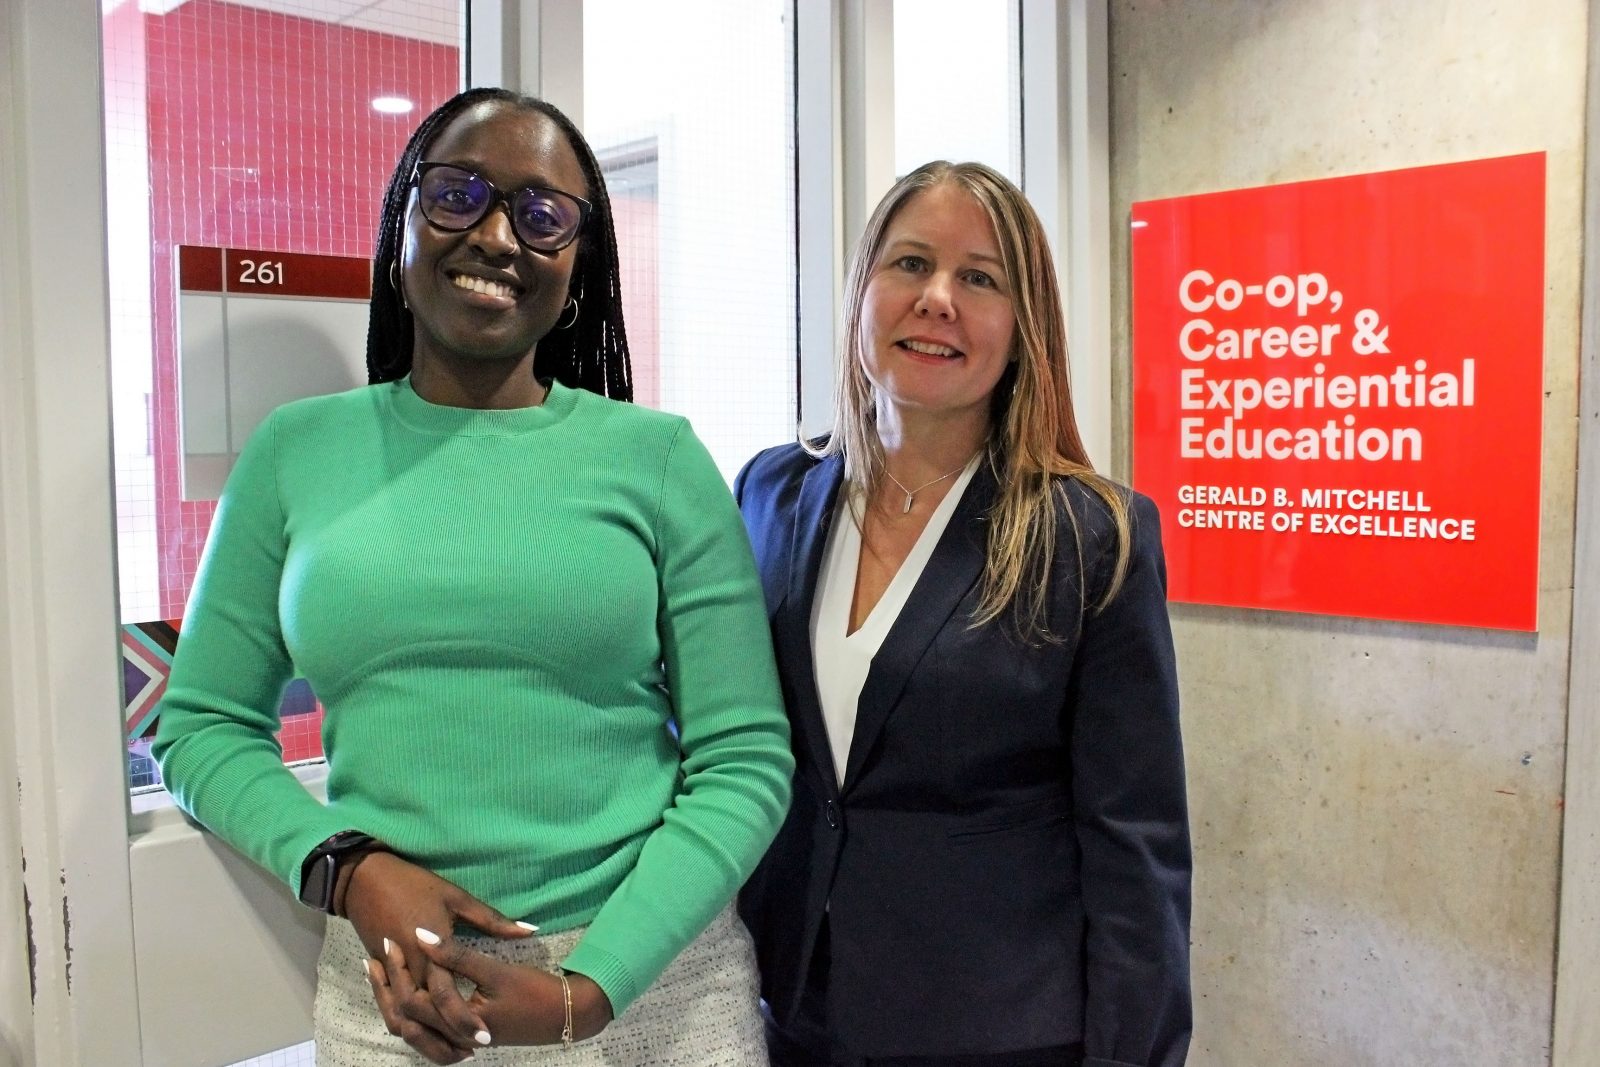 Clelia Kimana and Marisa Brown in front of the sign for the new Gerald B. Mitchell Centre of Excellence, located in TH 265, inside Brock’s Thistle Complex.